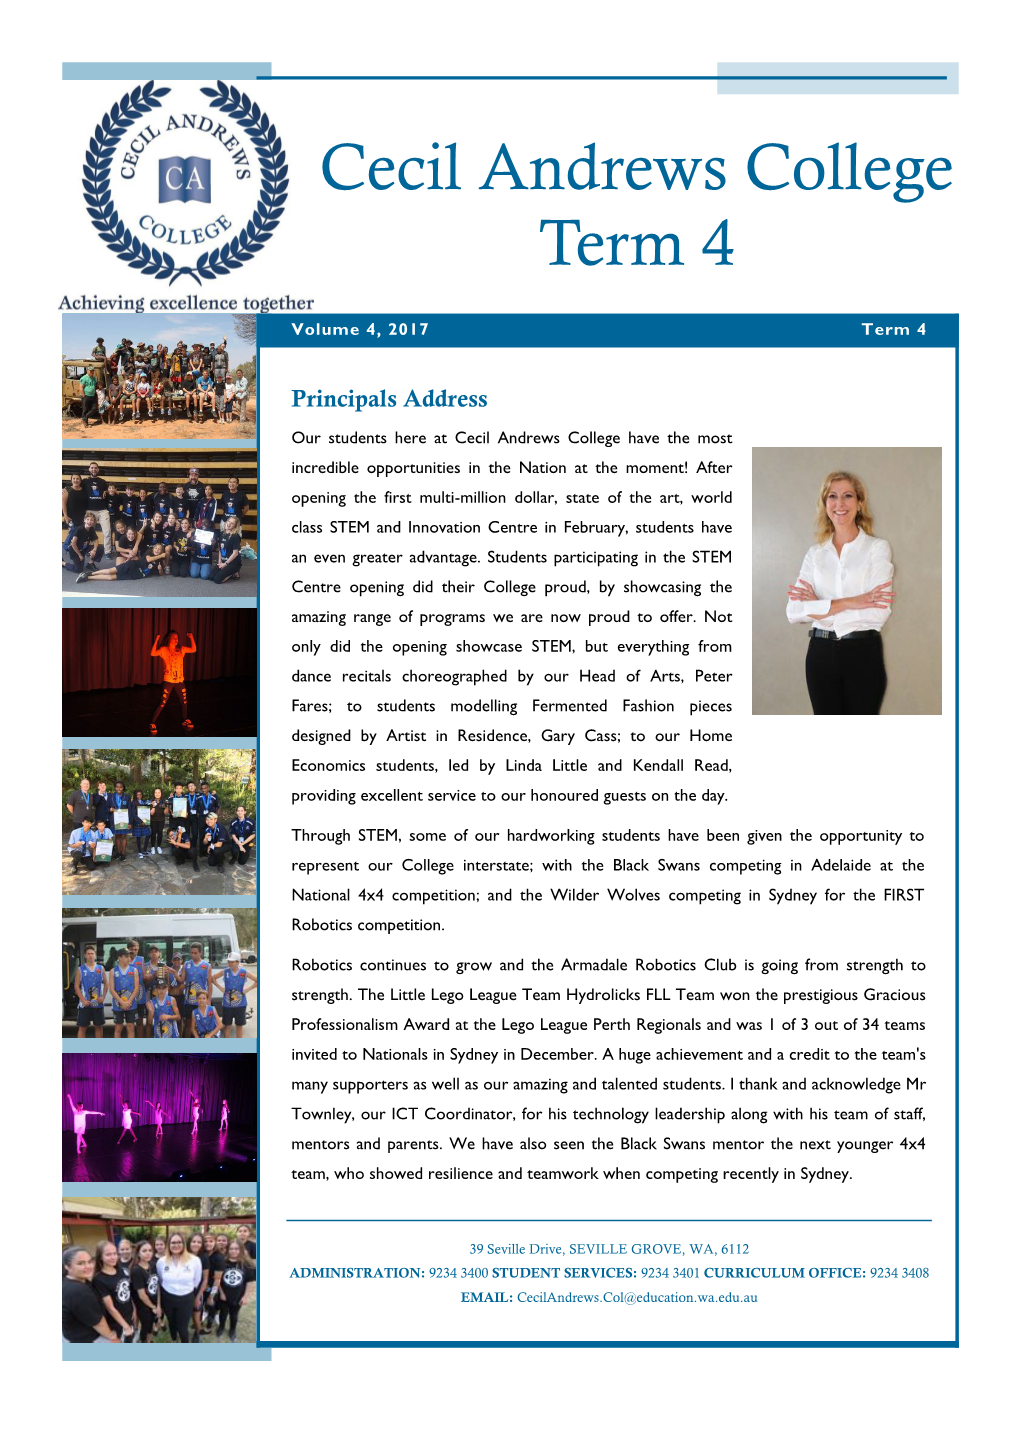 Cecil Andrews College Term 4